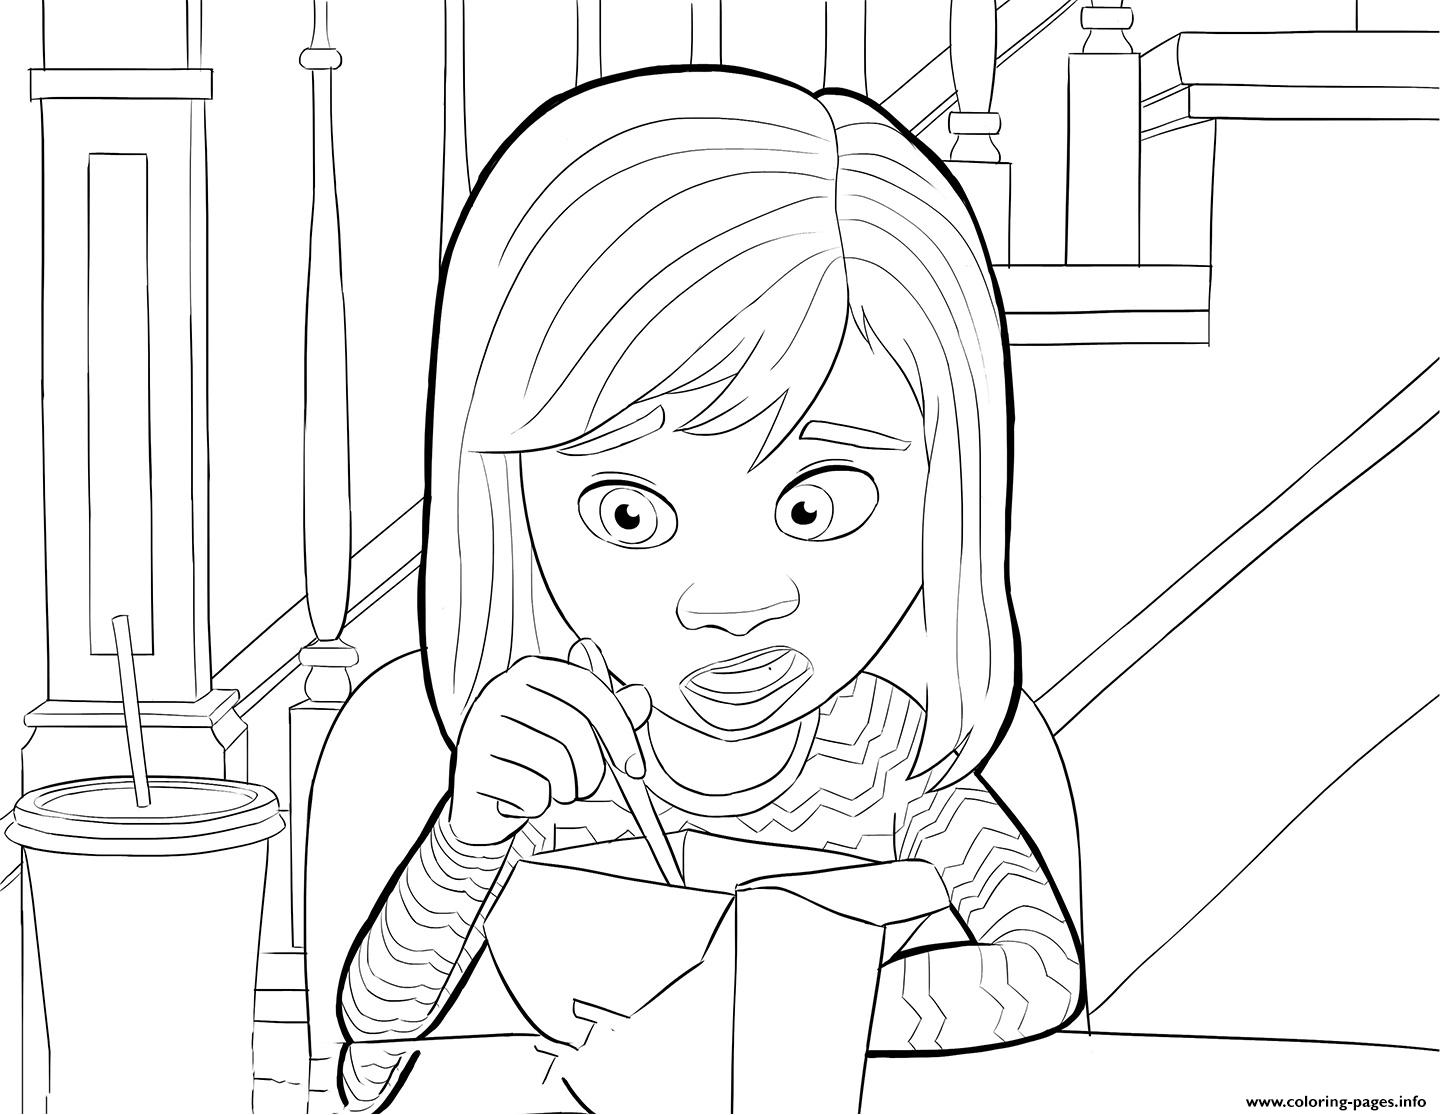 Riley Anderson Inside Out coloring